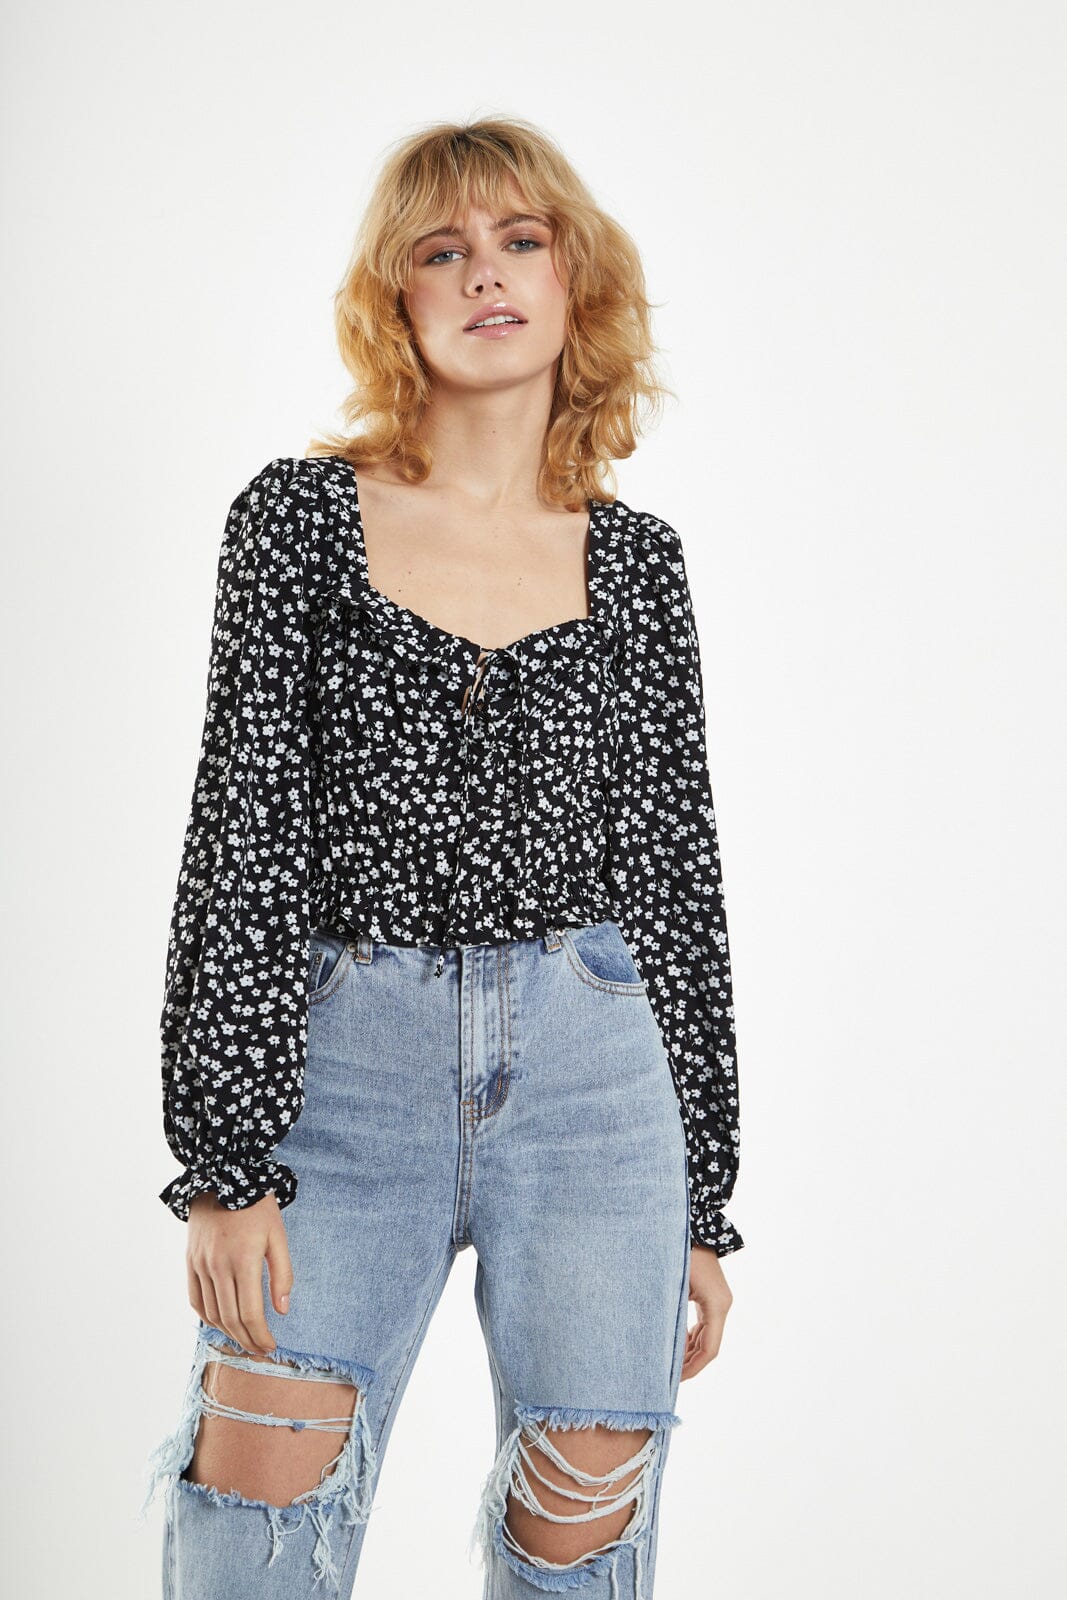 SIMPLE DITSY FLORAL BLOUSE Top GLAMOROUS 